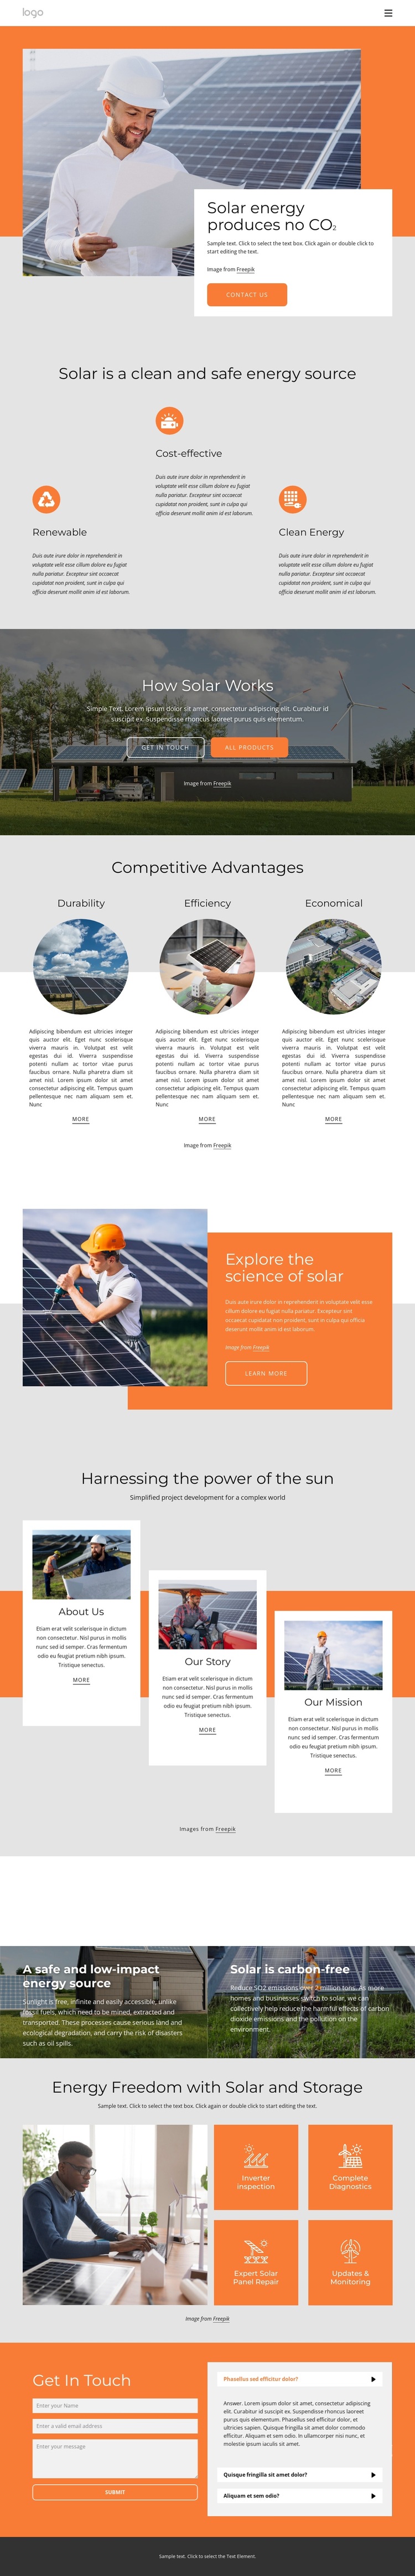 Power your home with clean solar energy Template